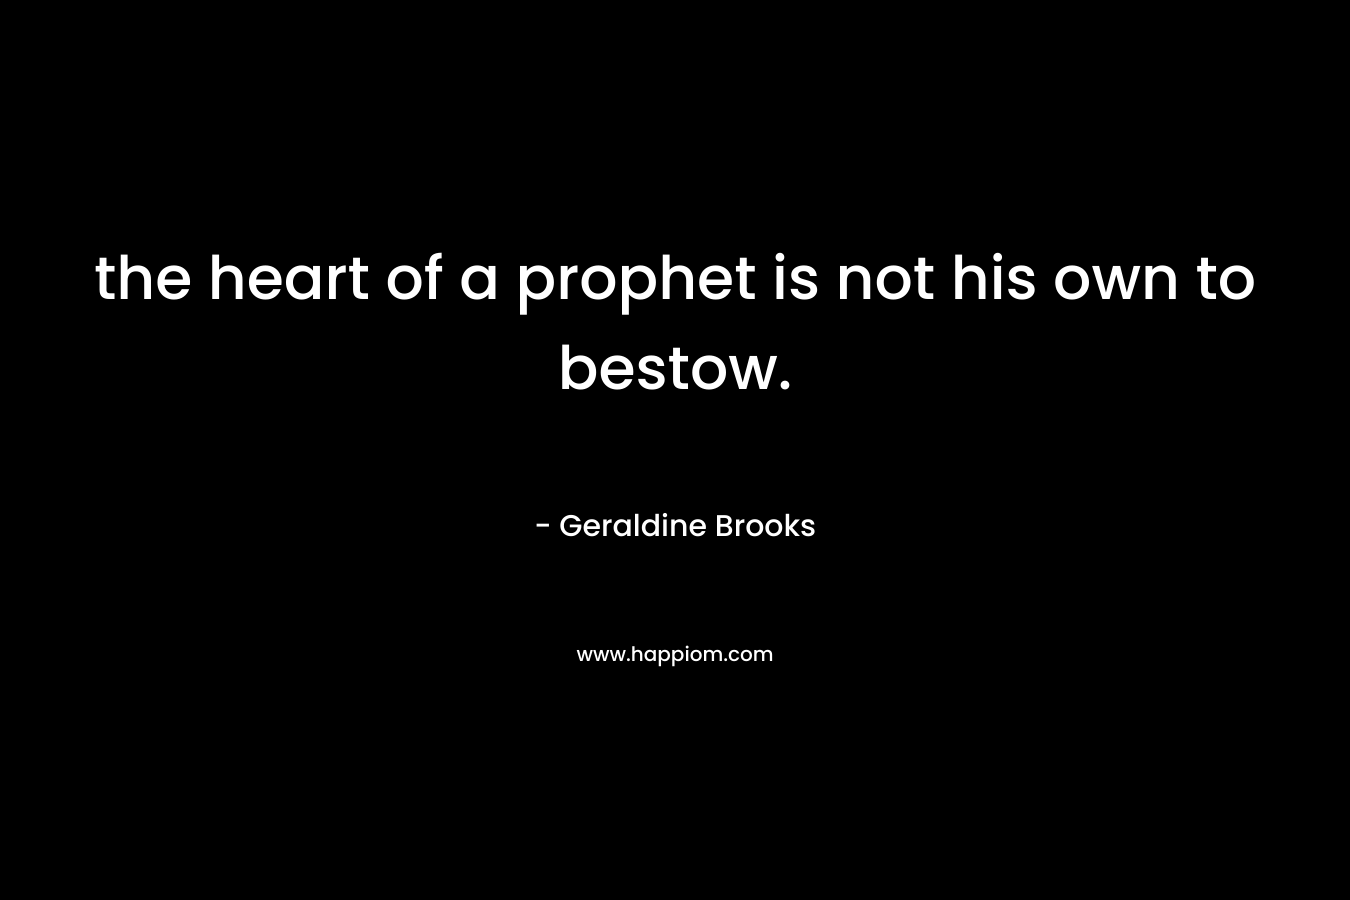 the heart of a prophet is not his own to bestow.